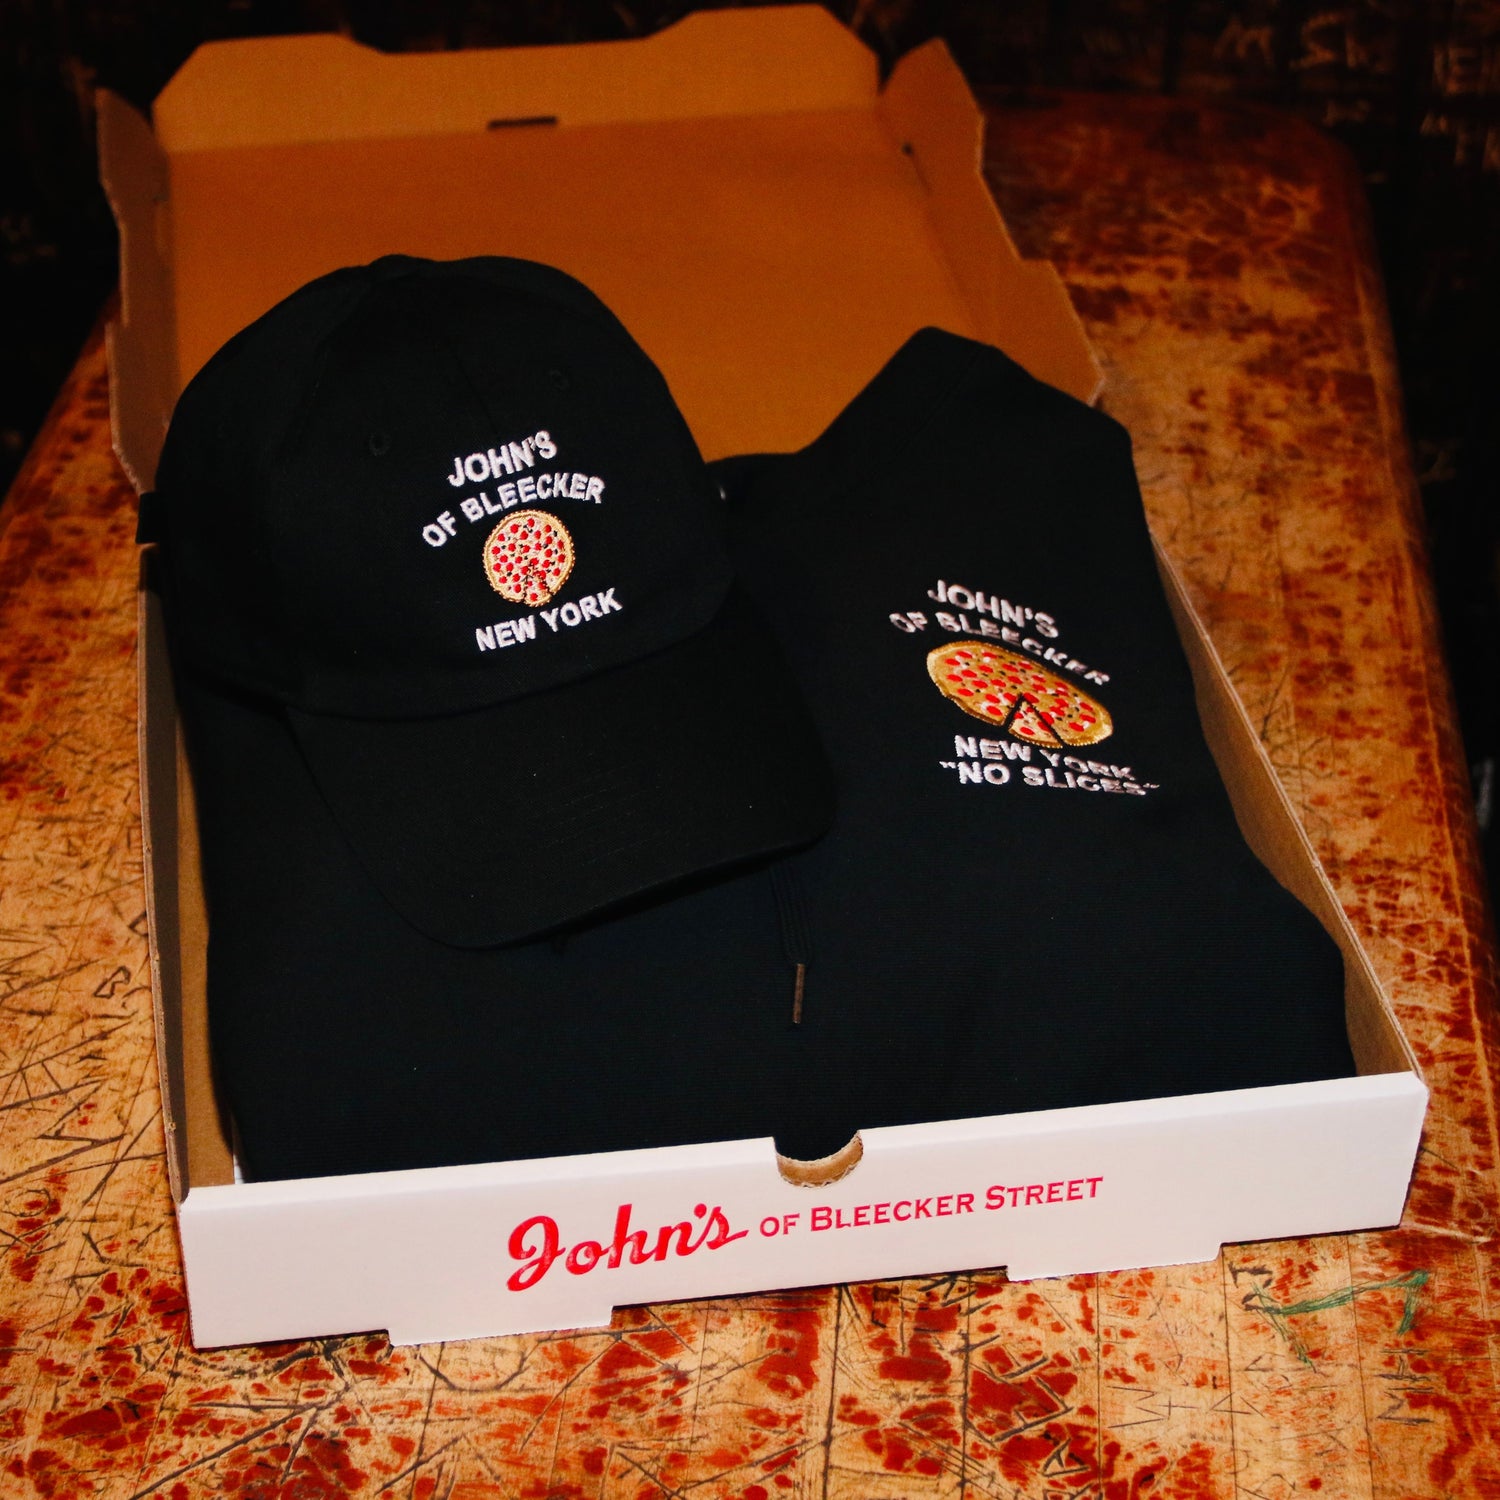 John's Pizza "No Slices" Hoodie and the John's Pizza "No Slices" Hat inside of a pizza box